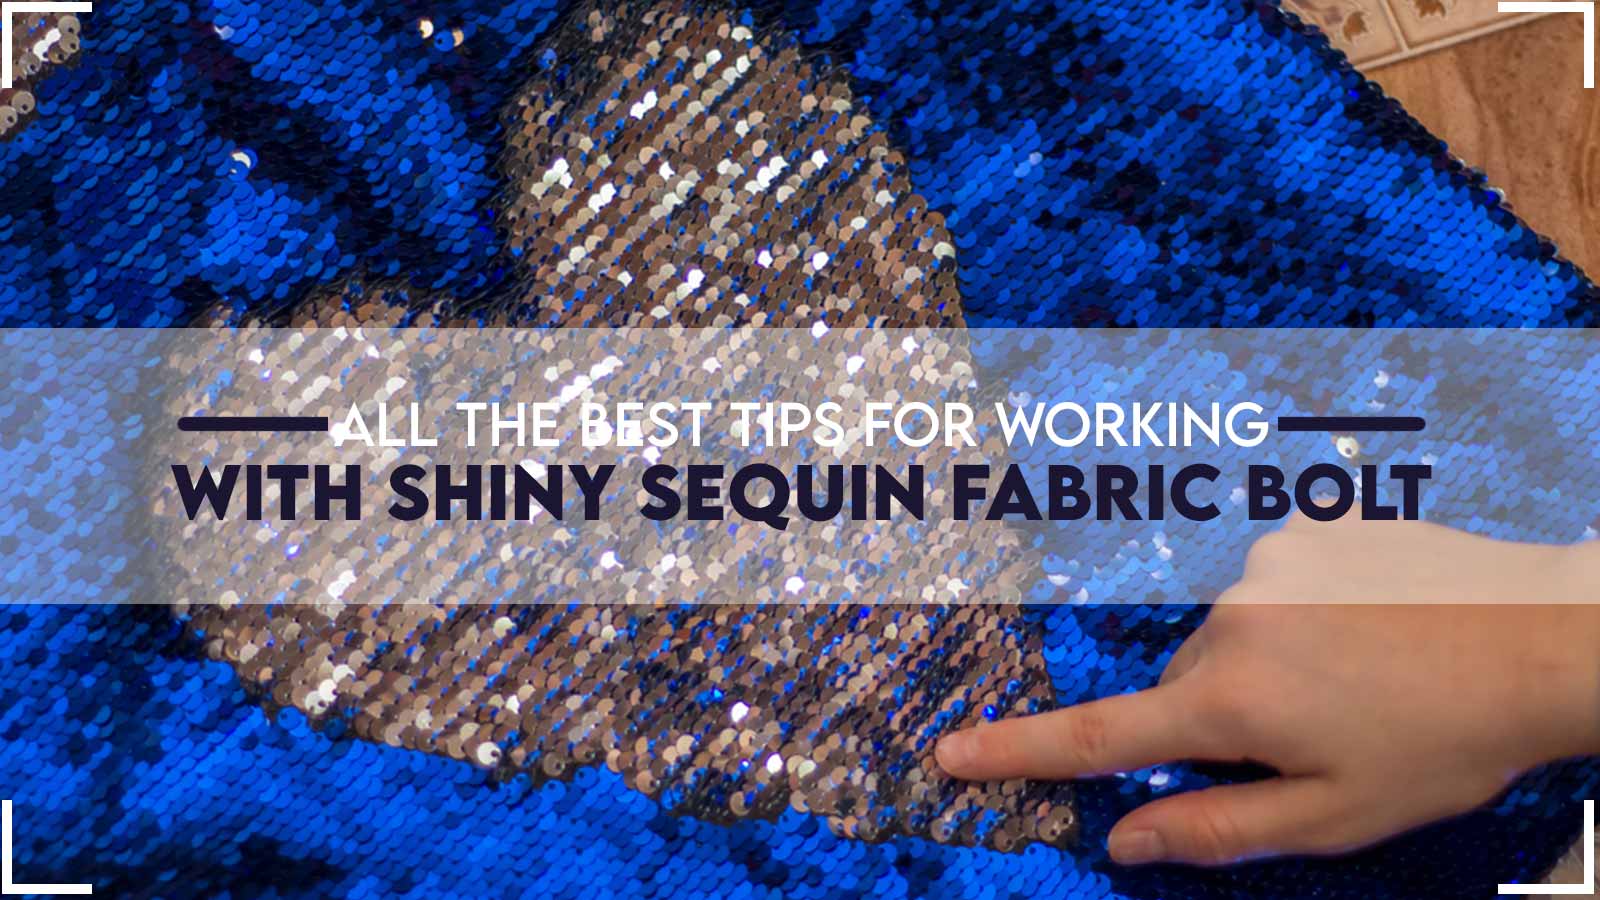 All the Best Tips for Working with Shiny Sequin Fabric Bolt - ICE FABRICS